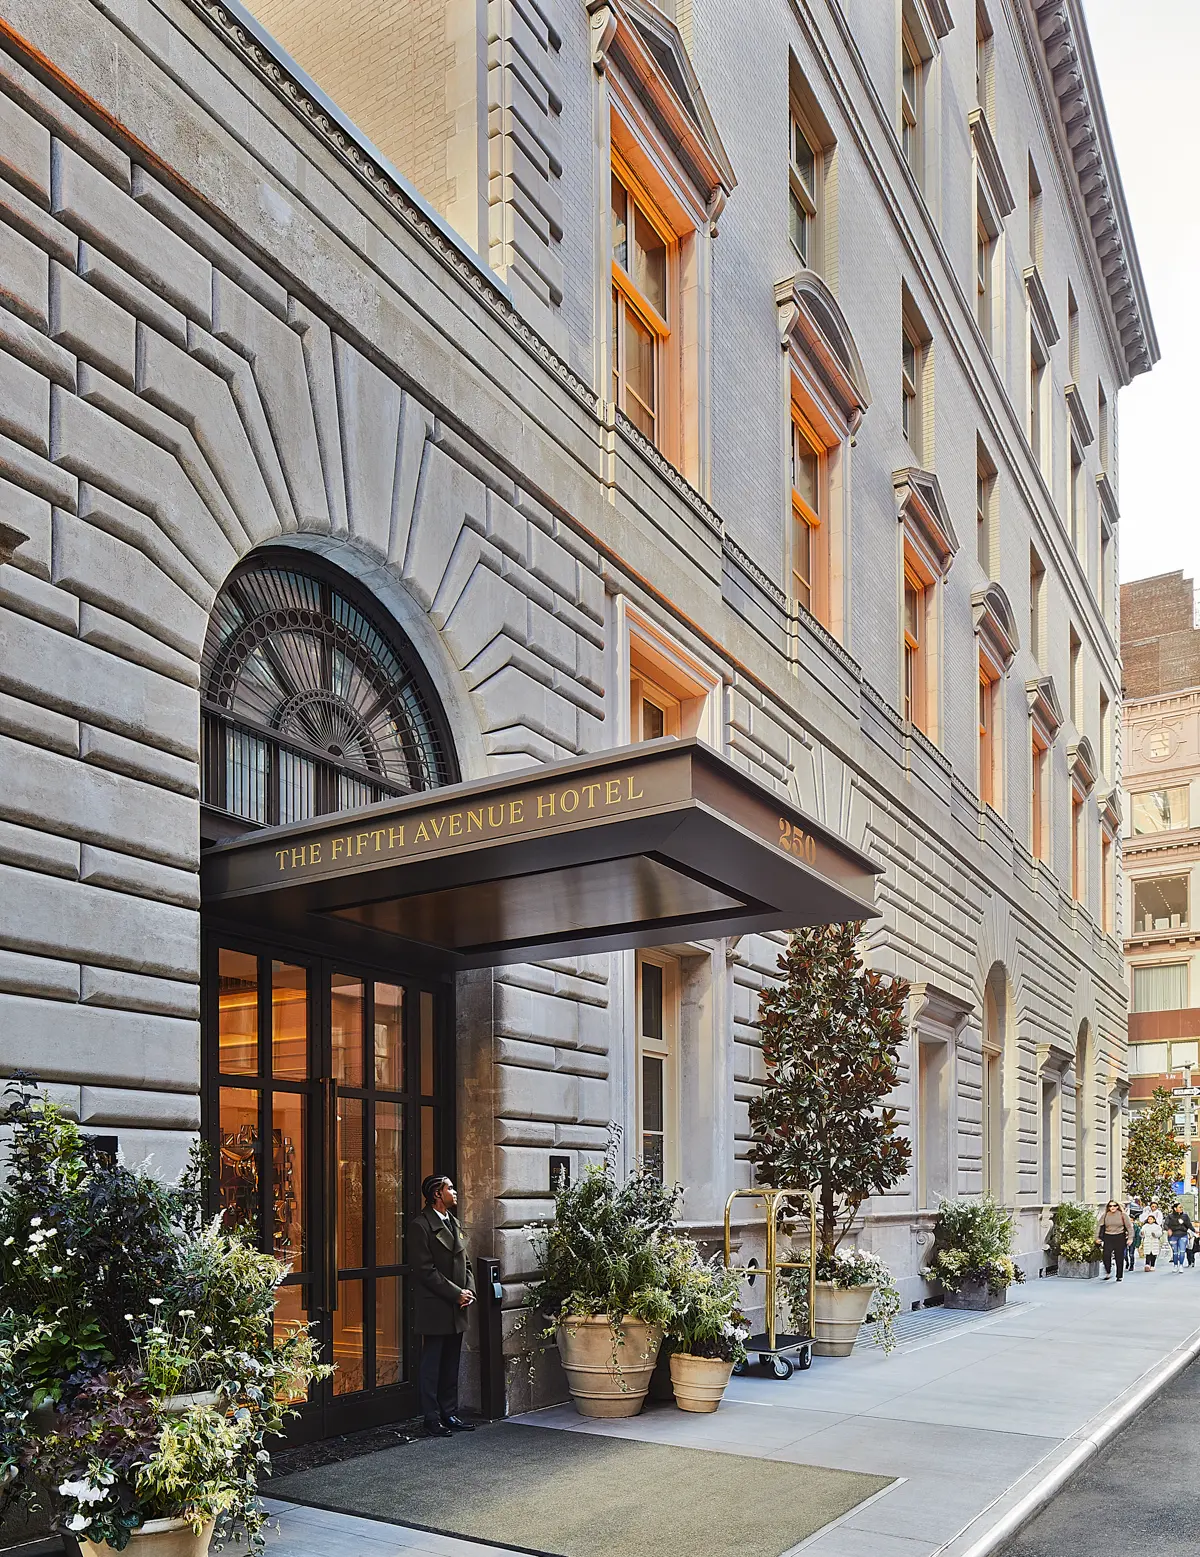 A captivating view of the entrance to the Fifth Avenue hotel